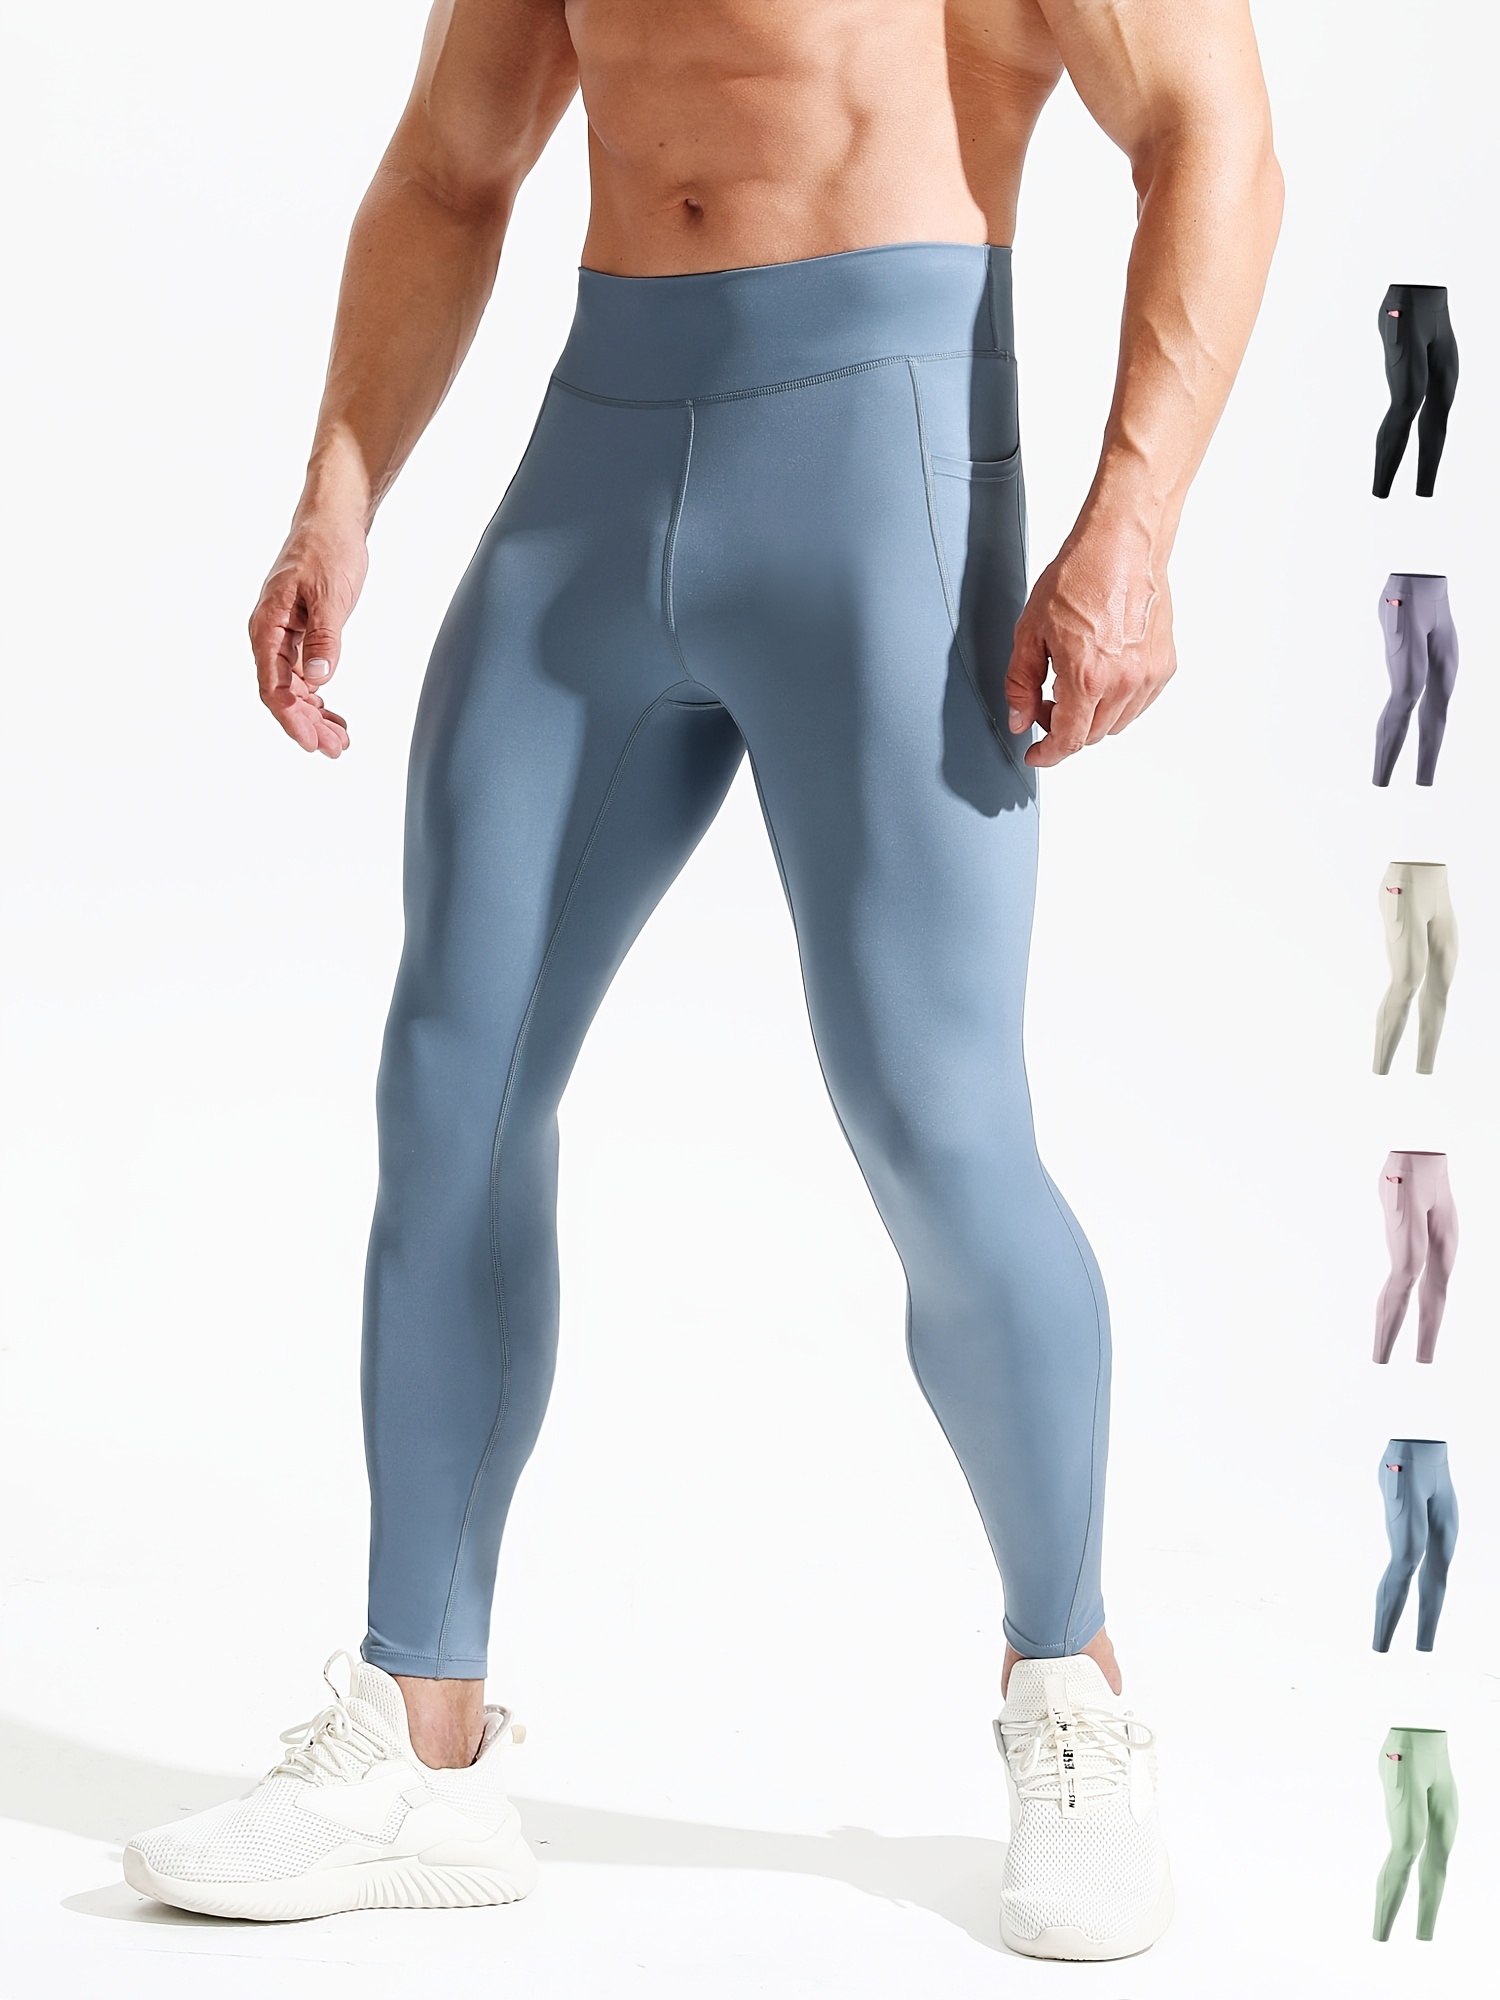 Men Compression Pants Sports Tights men compression Fitness Trousers Running  Training Leggings 